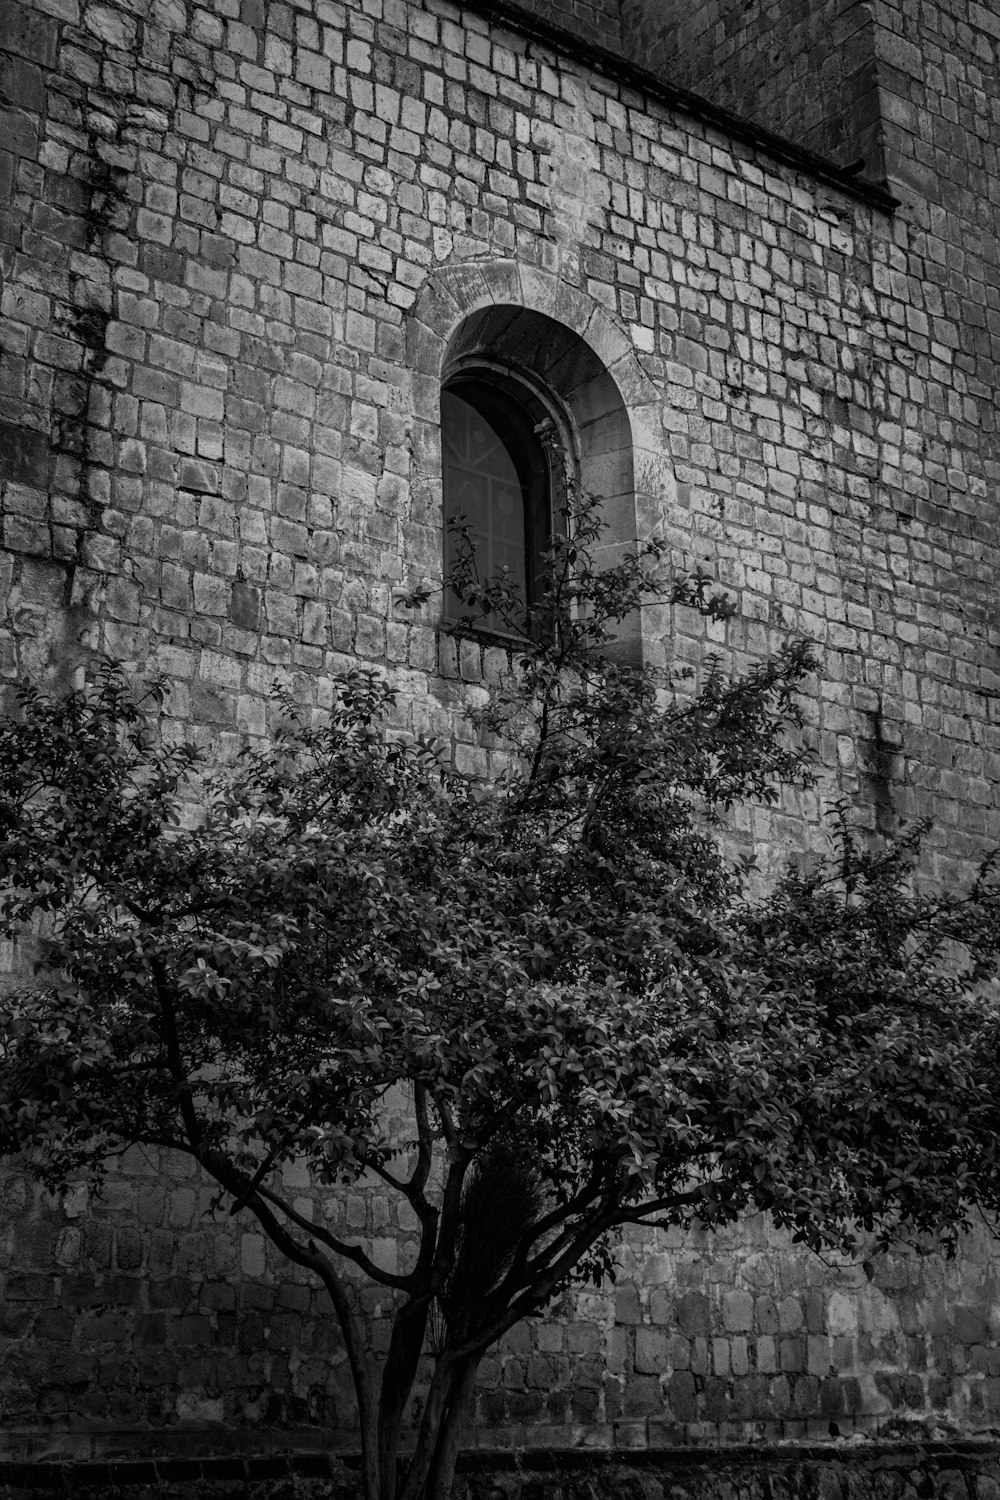 a black and white photo of a tree in front of a brick building